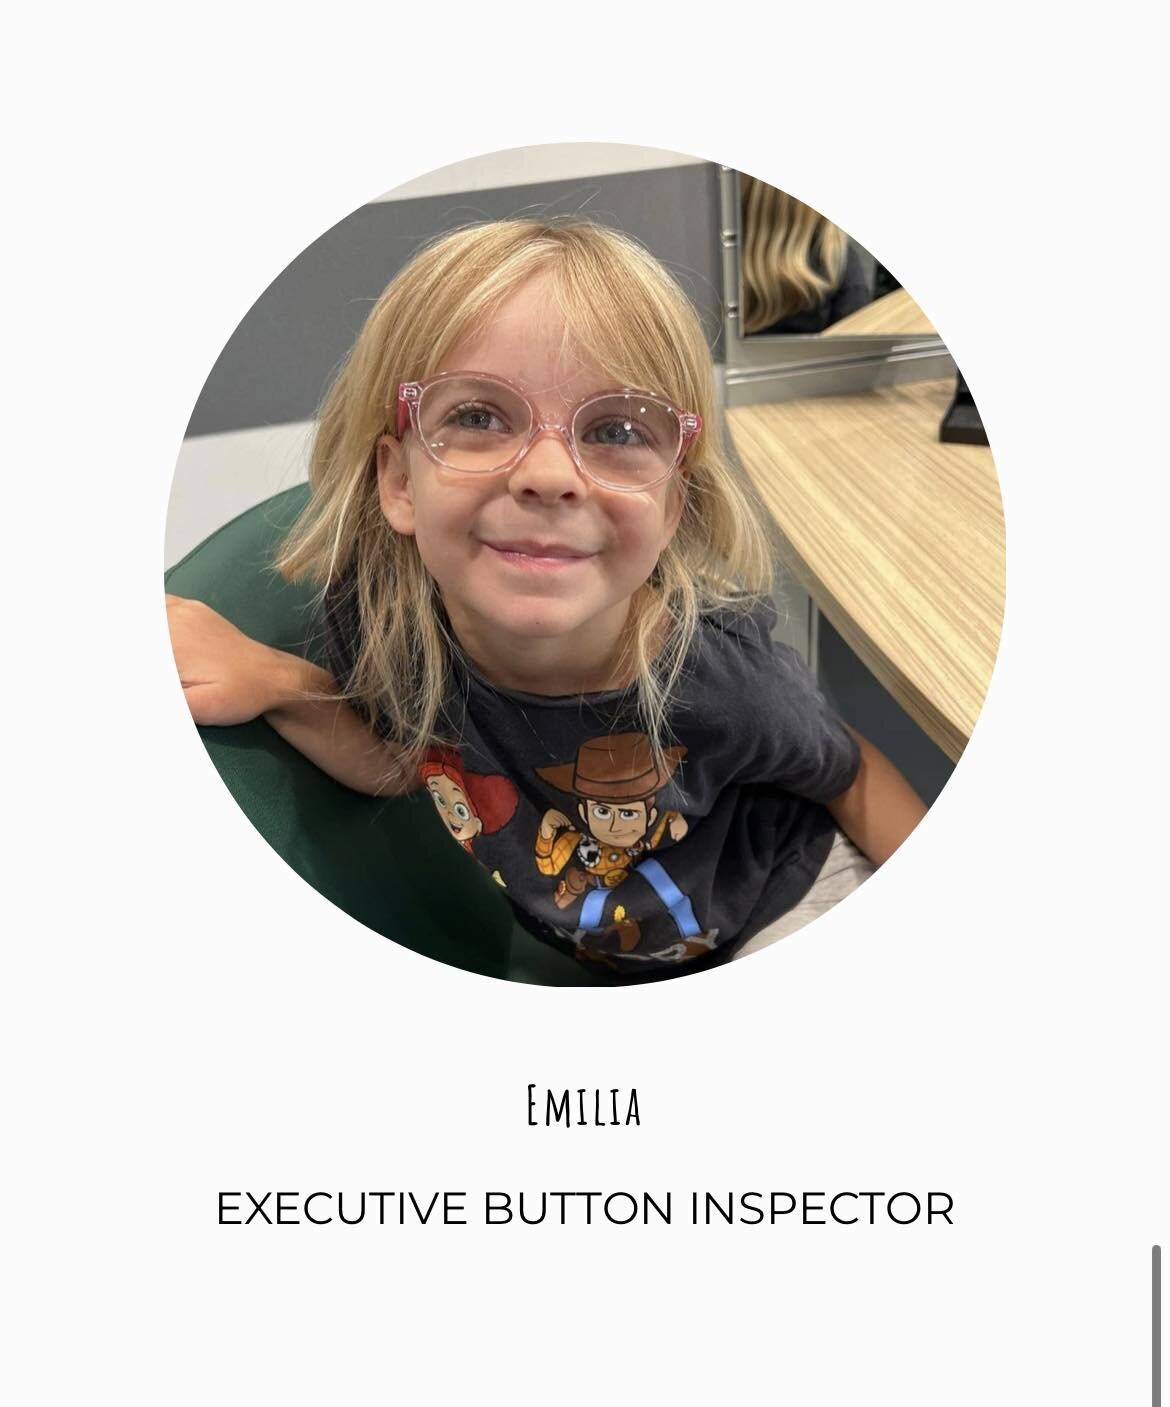 🌻There are so many magical people that go into making this business work and be all it can be! 🌻

Today we would like to wish our &lsquo;Executive Button Inspector&rsquo; a happy 6th Birthday! 🎂 🥳 
Sew &amp; Sew really would not be what it is tod